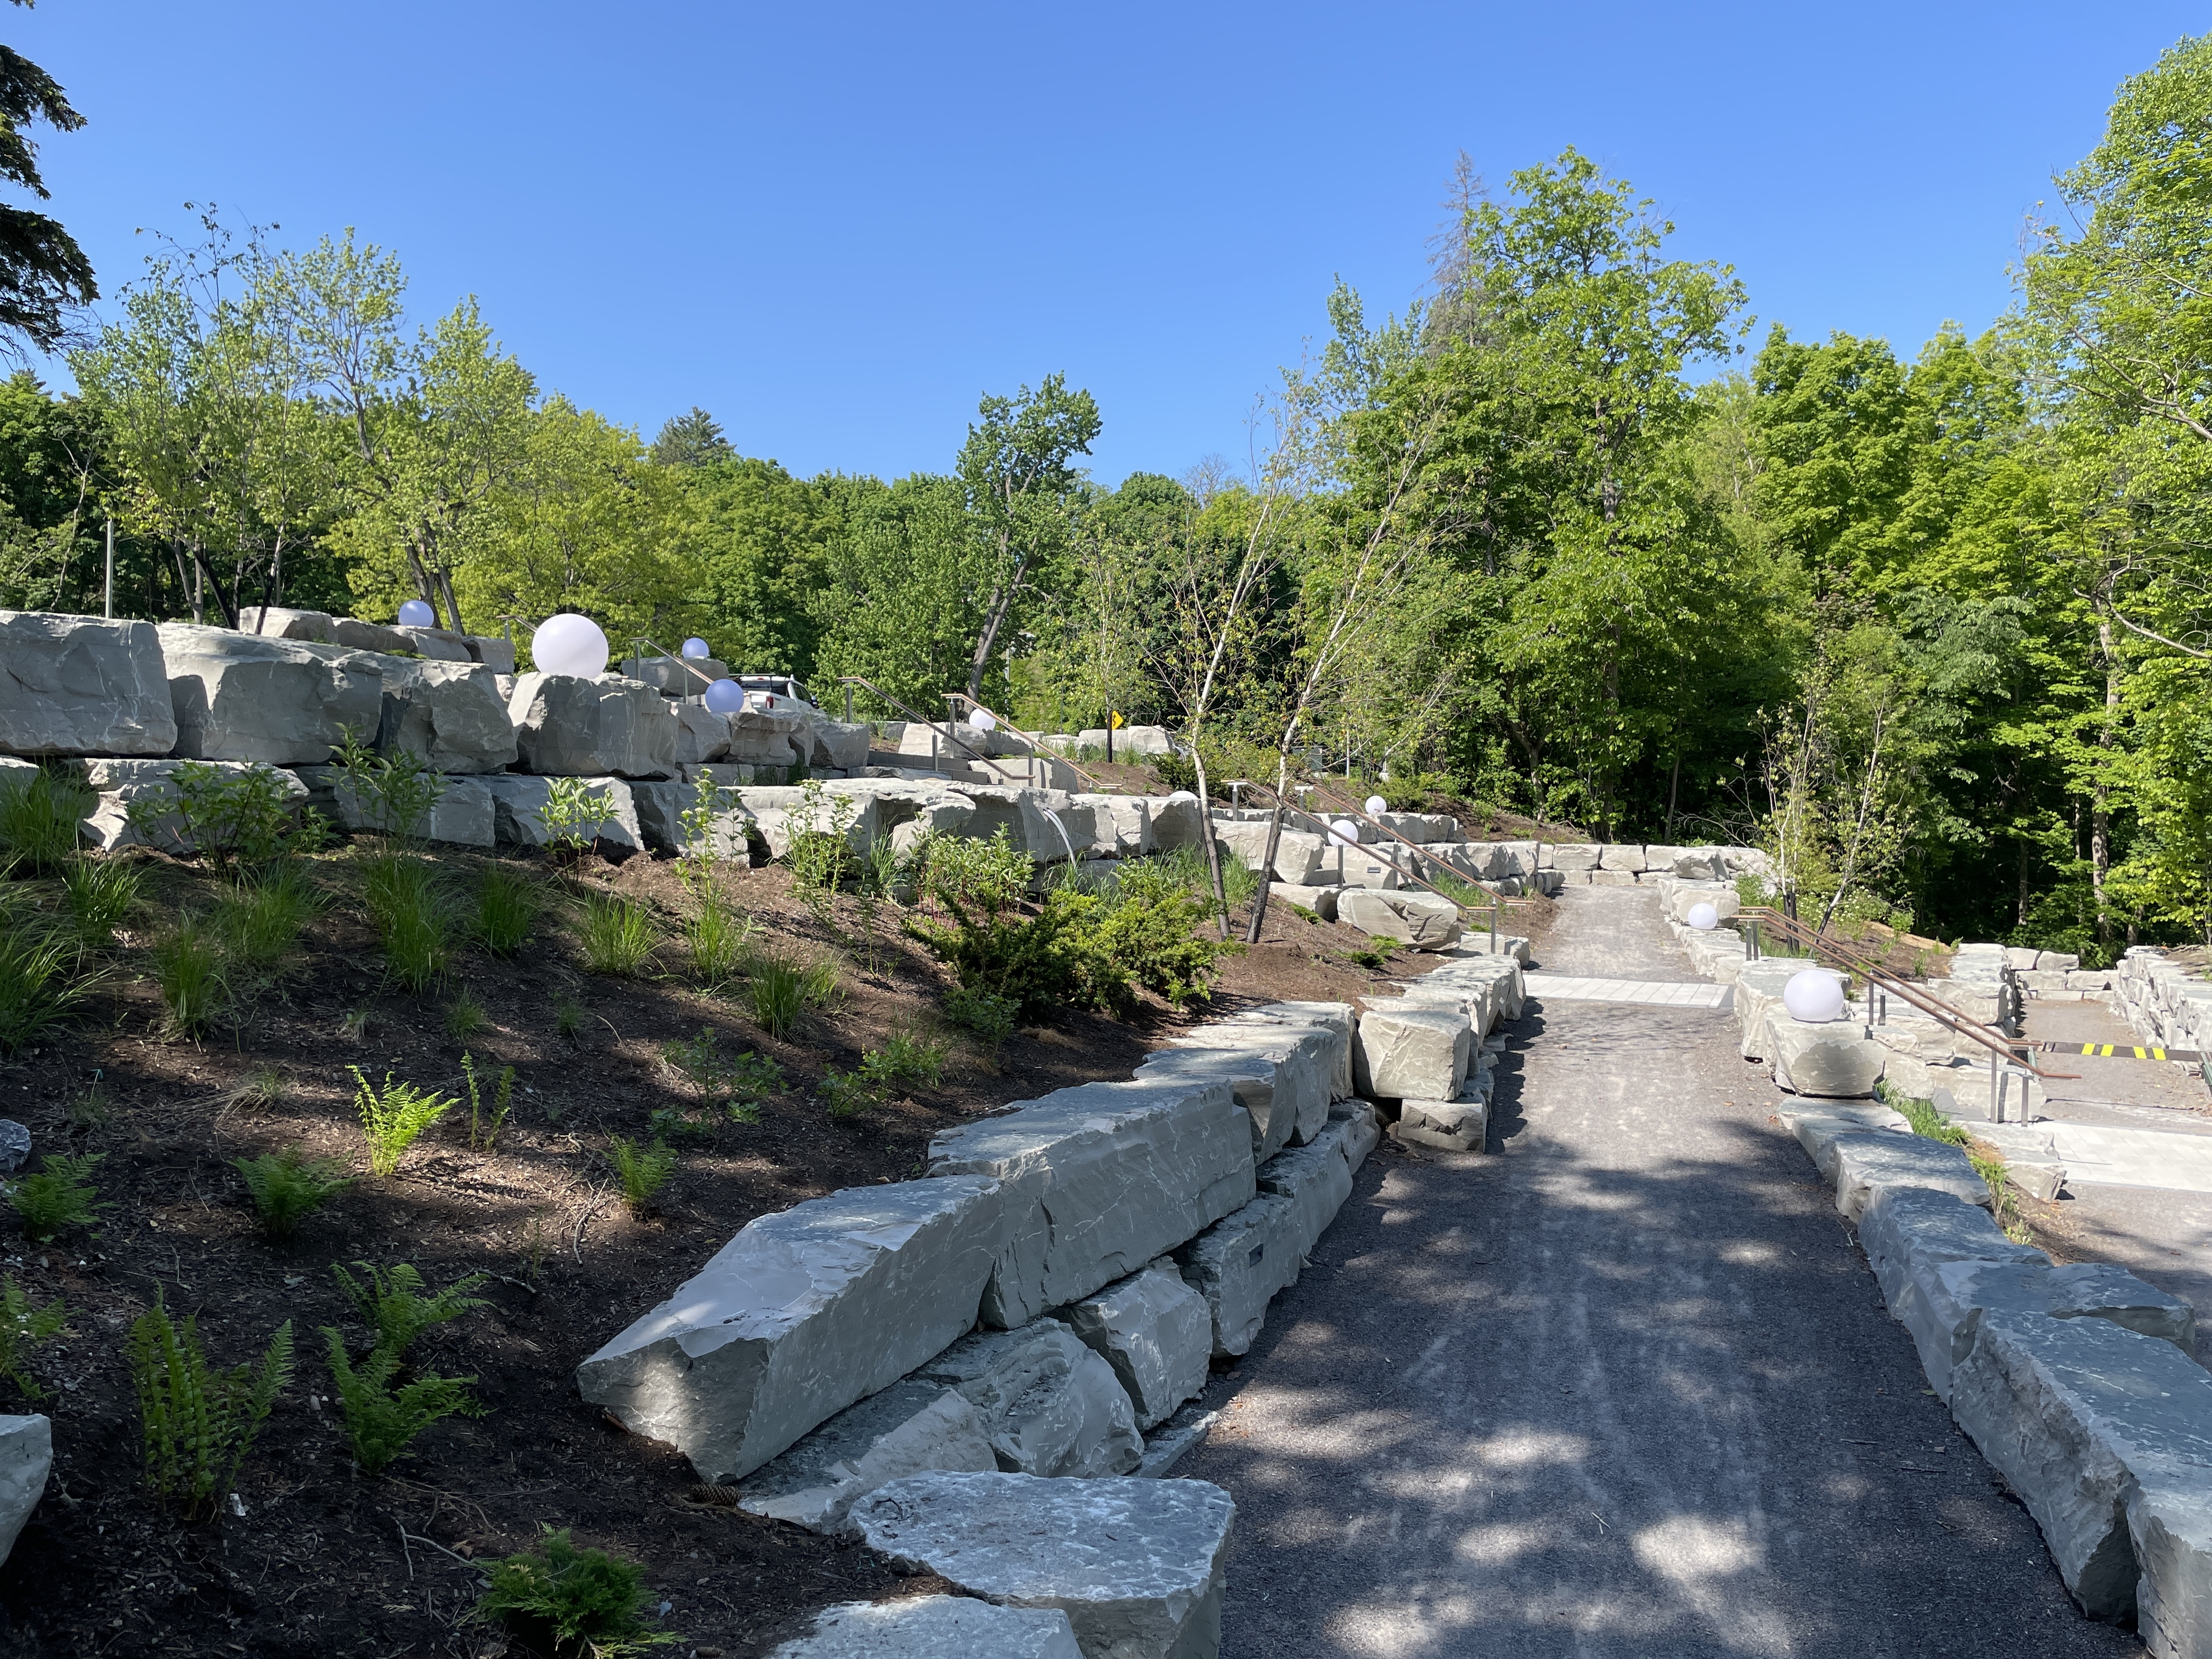 View of the universally accessible path from the parkway to the pedestrian bridge landing